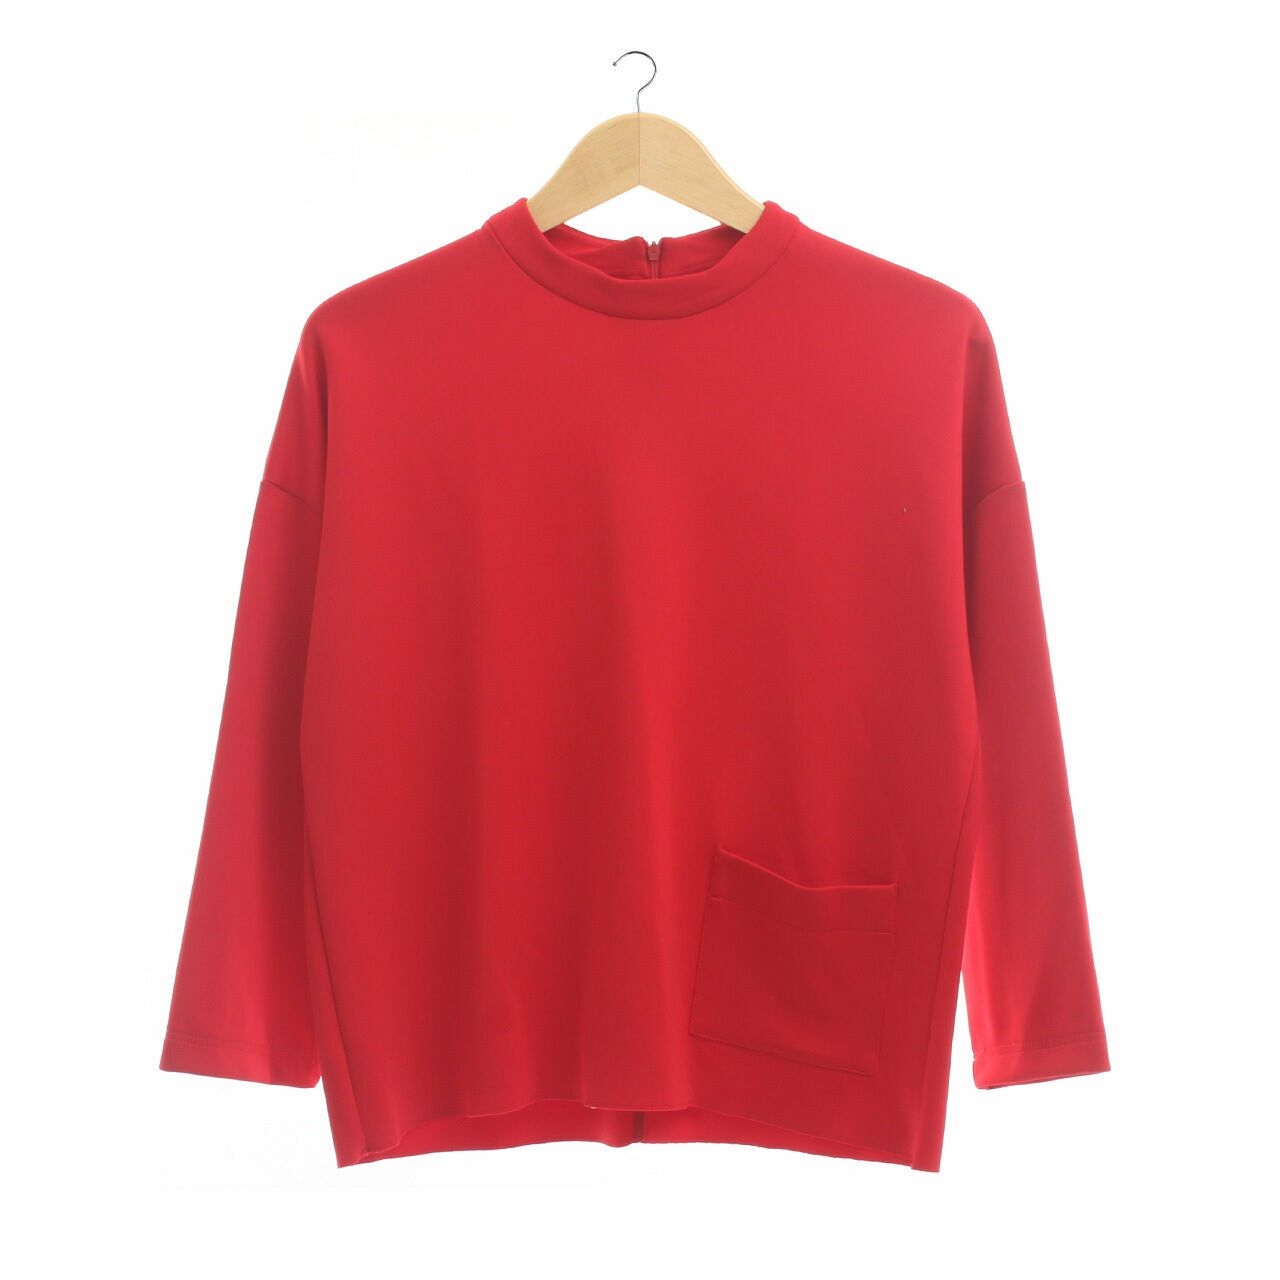 Cotton Ink Red Long Sleeve Blouse